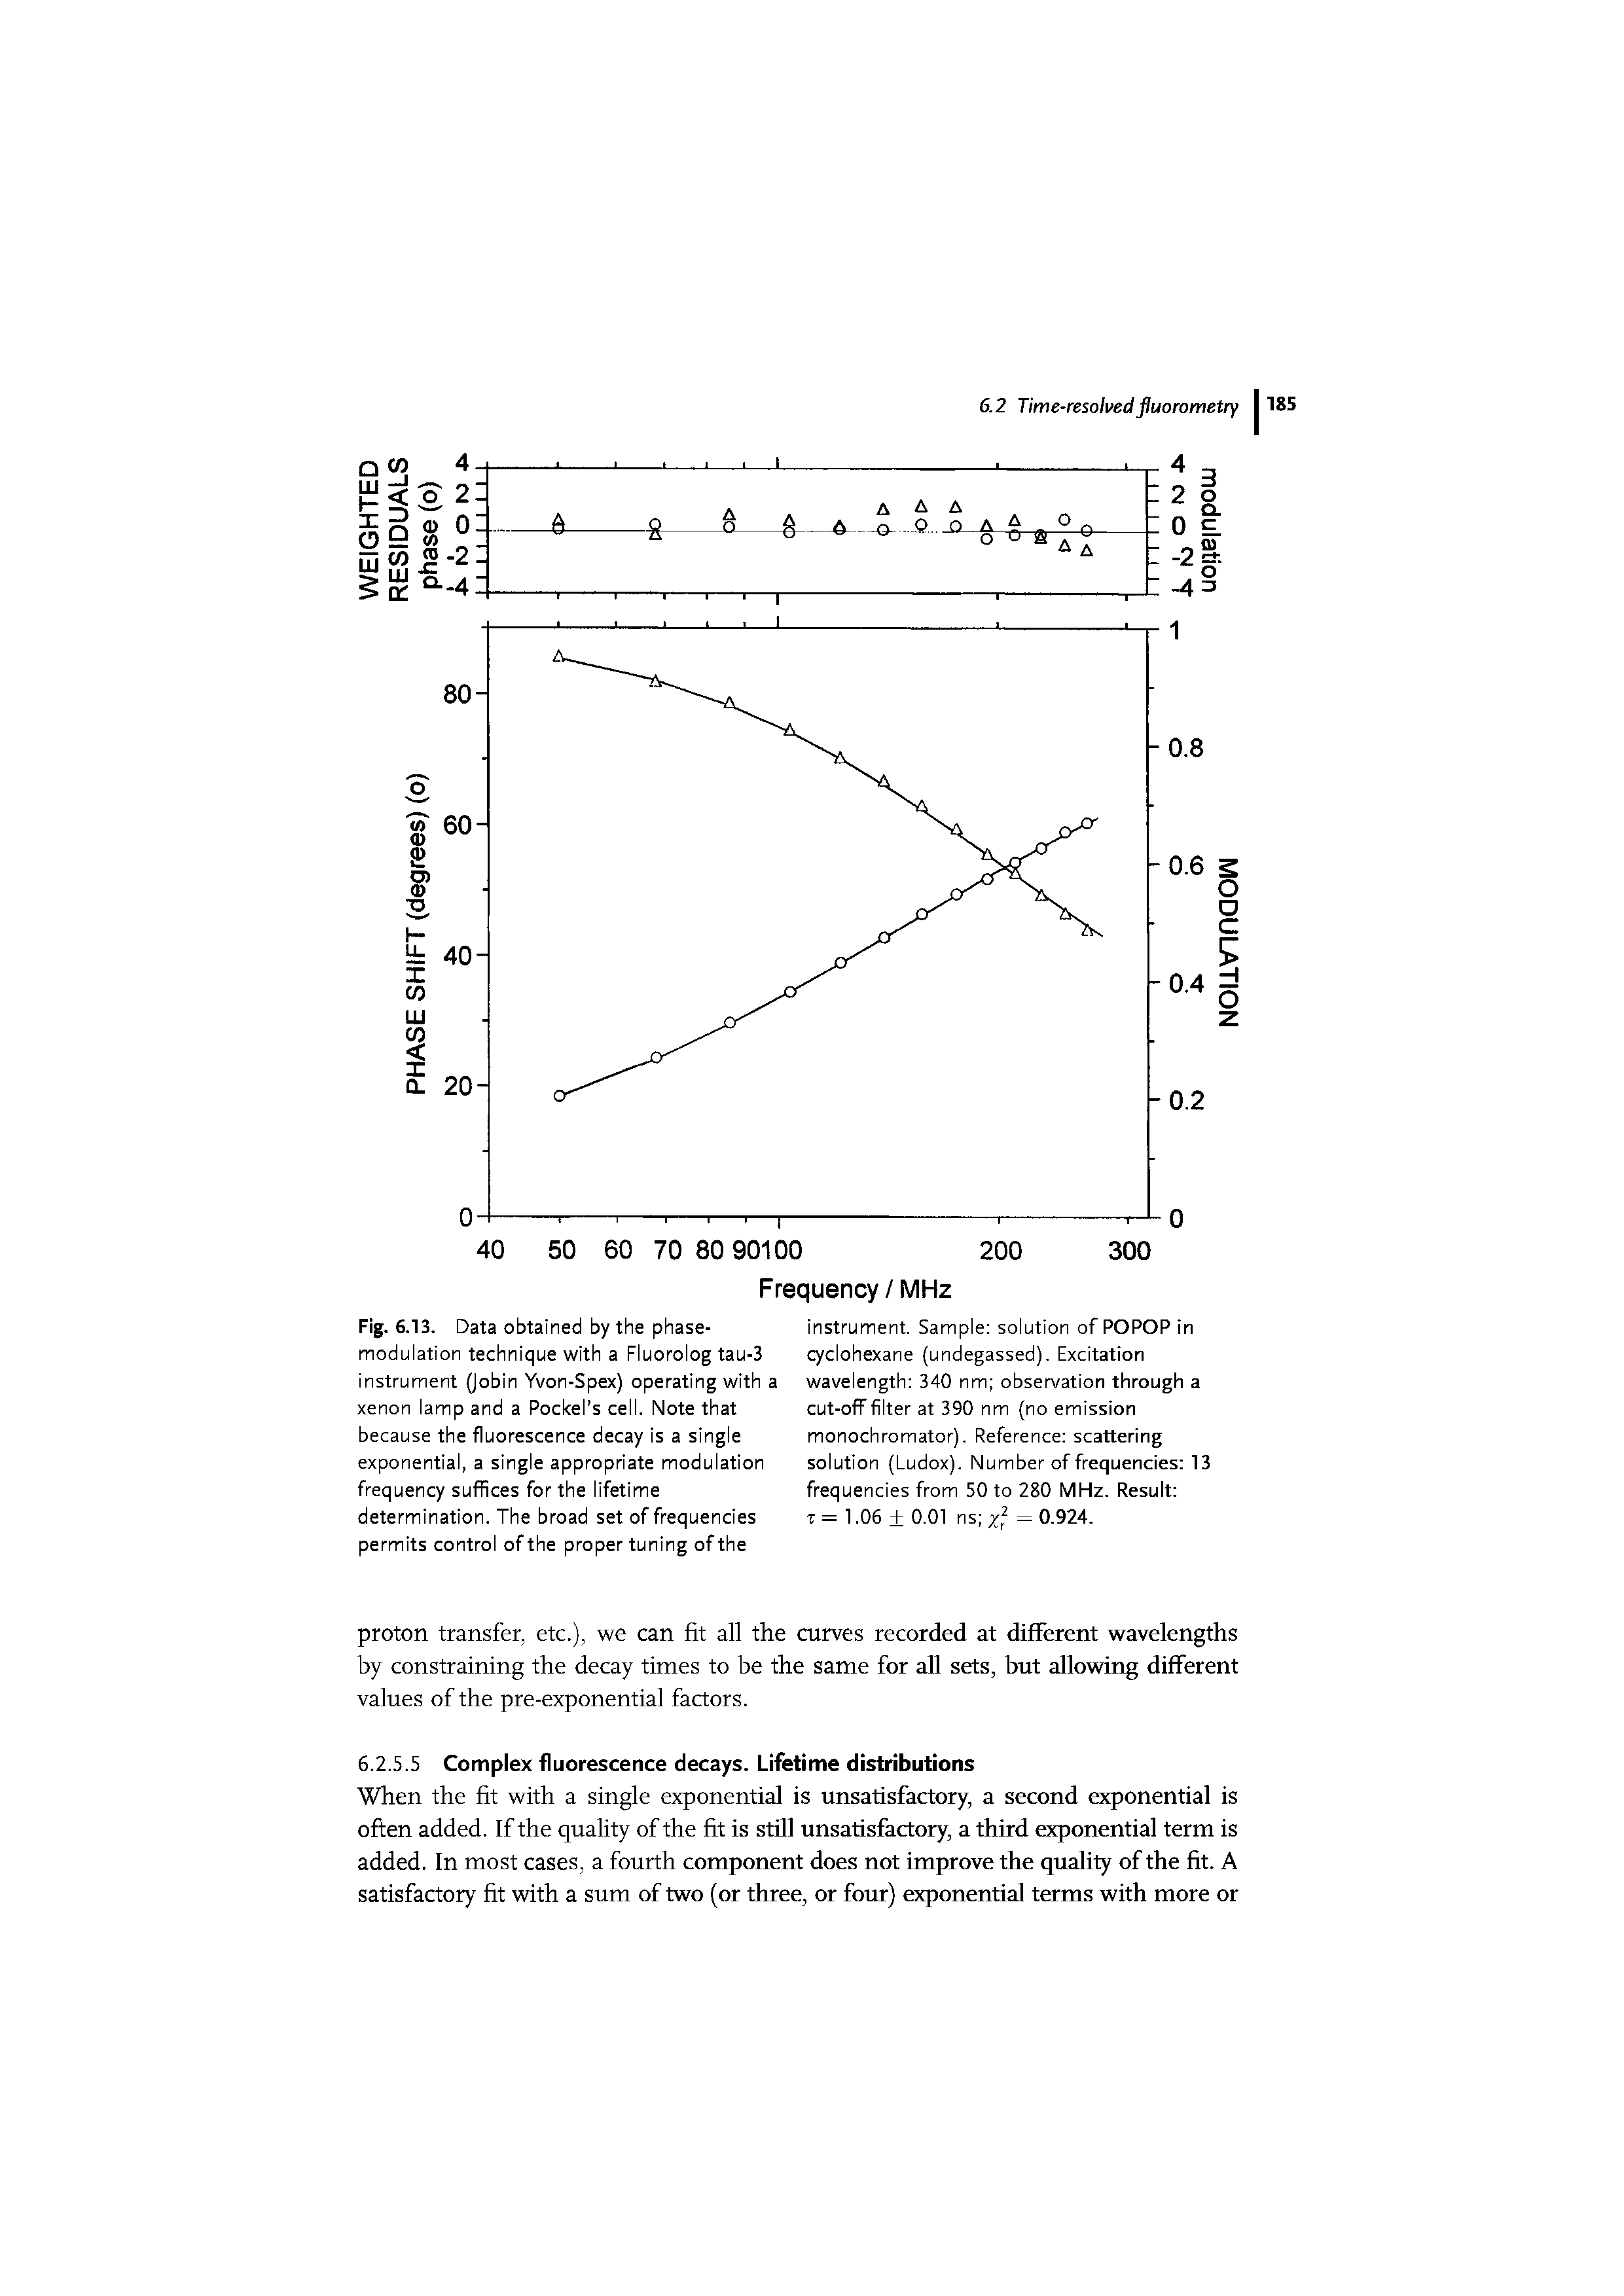 Fig. 6.13. Data obtained by the phase-modulation technique with a Fluorolog tau-3 instrument (Jobin Yvon-Spex) operating with a xenon lamp and a Pockel s cell. Note that because the fluorescence decay is a single exponential, a single appropriate modulation frequency suffices for the lifetime determination. The broad set of frequencies permits control of the proper tuning of the...